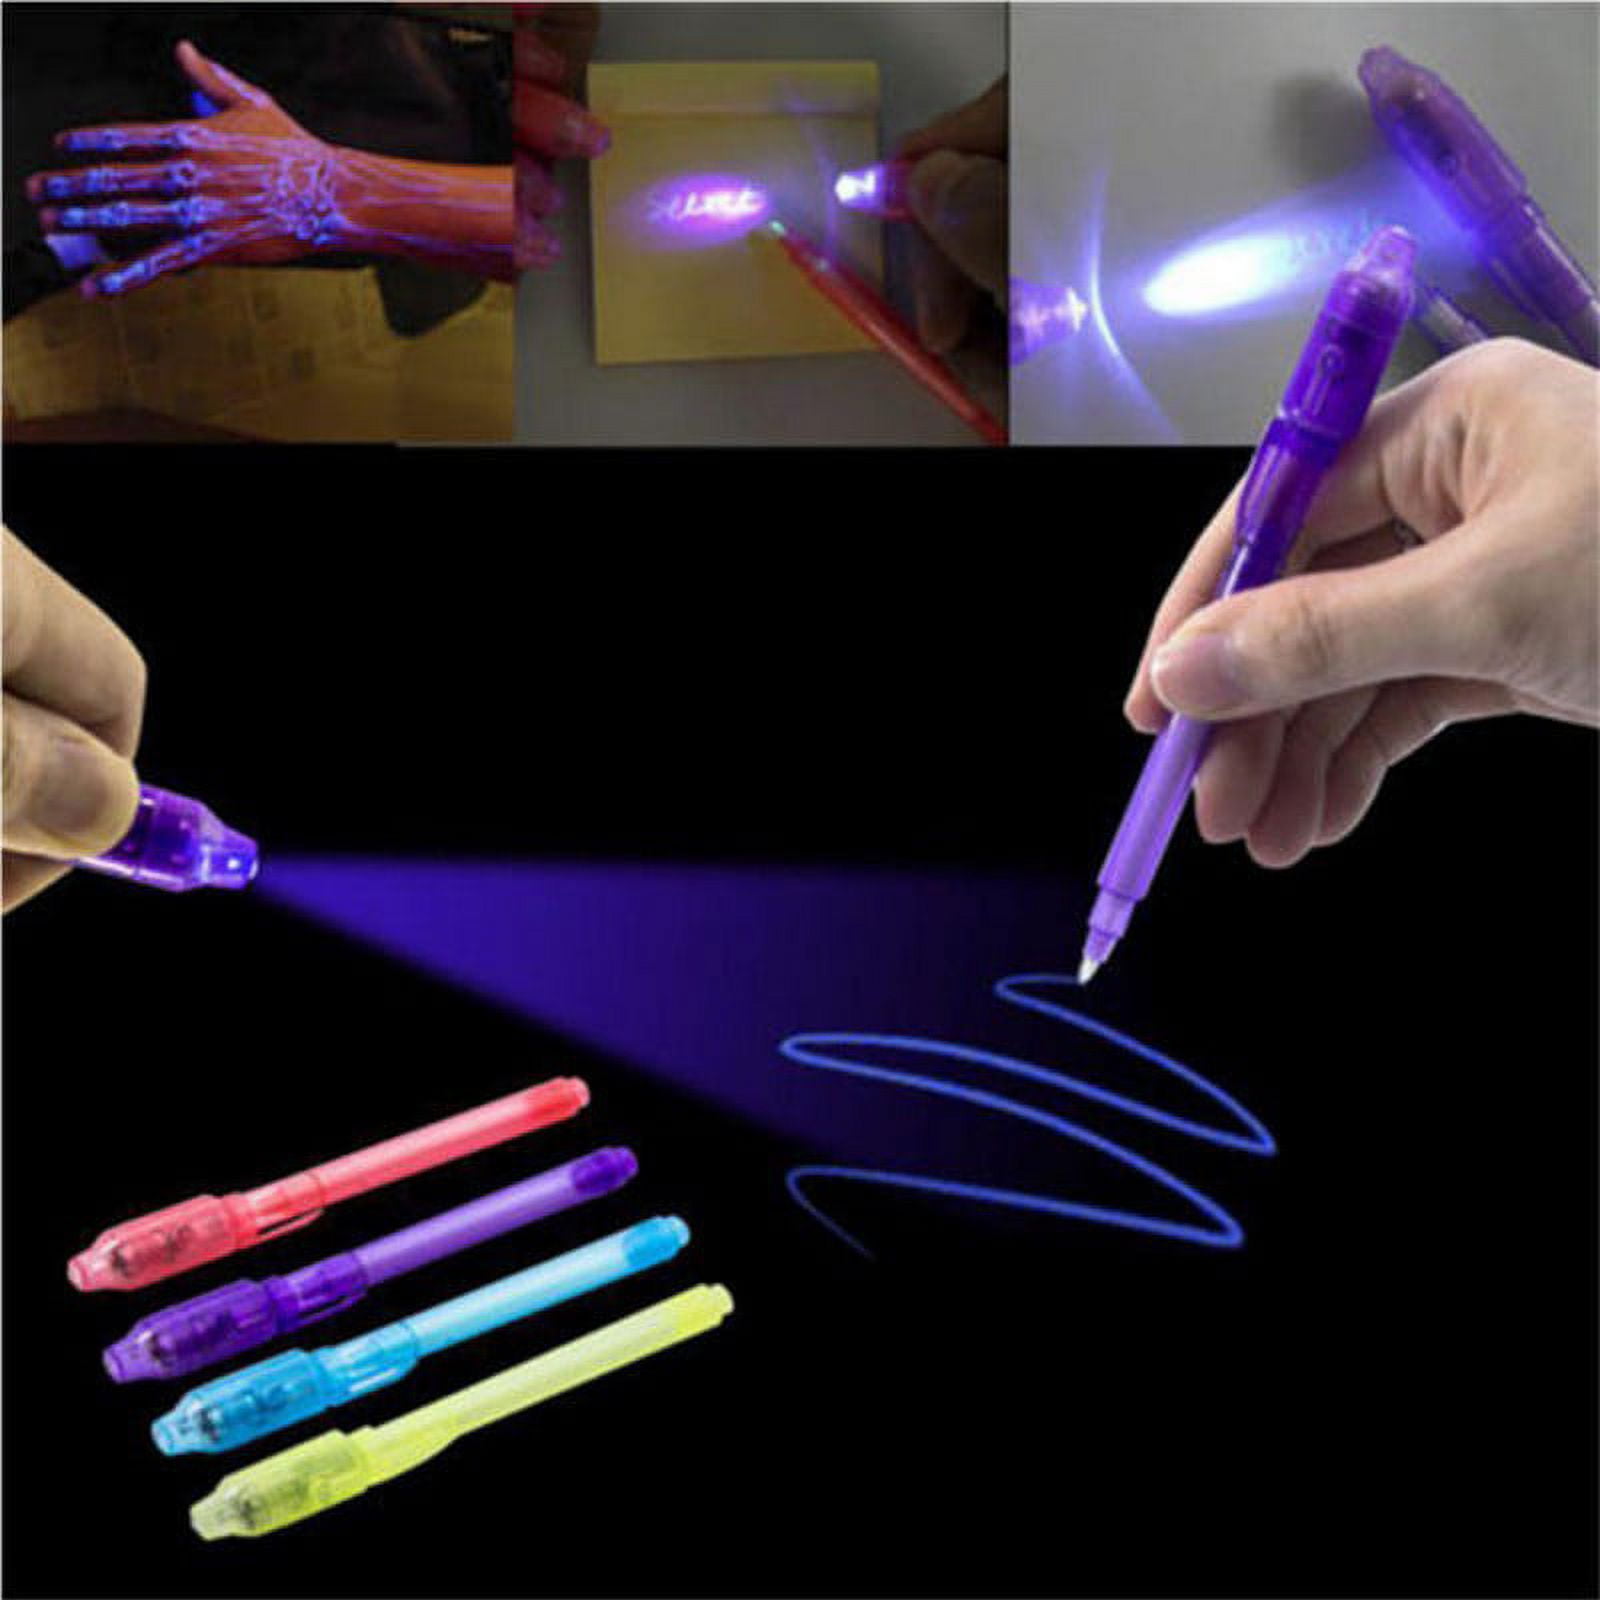 SCStyle Invisible Ink Pen,Spy Pen Marker Kid Pens for Writing